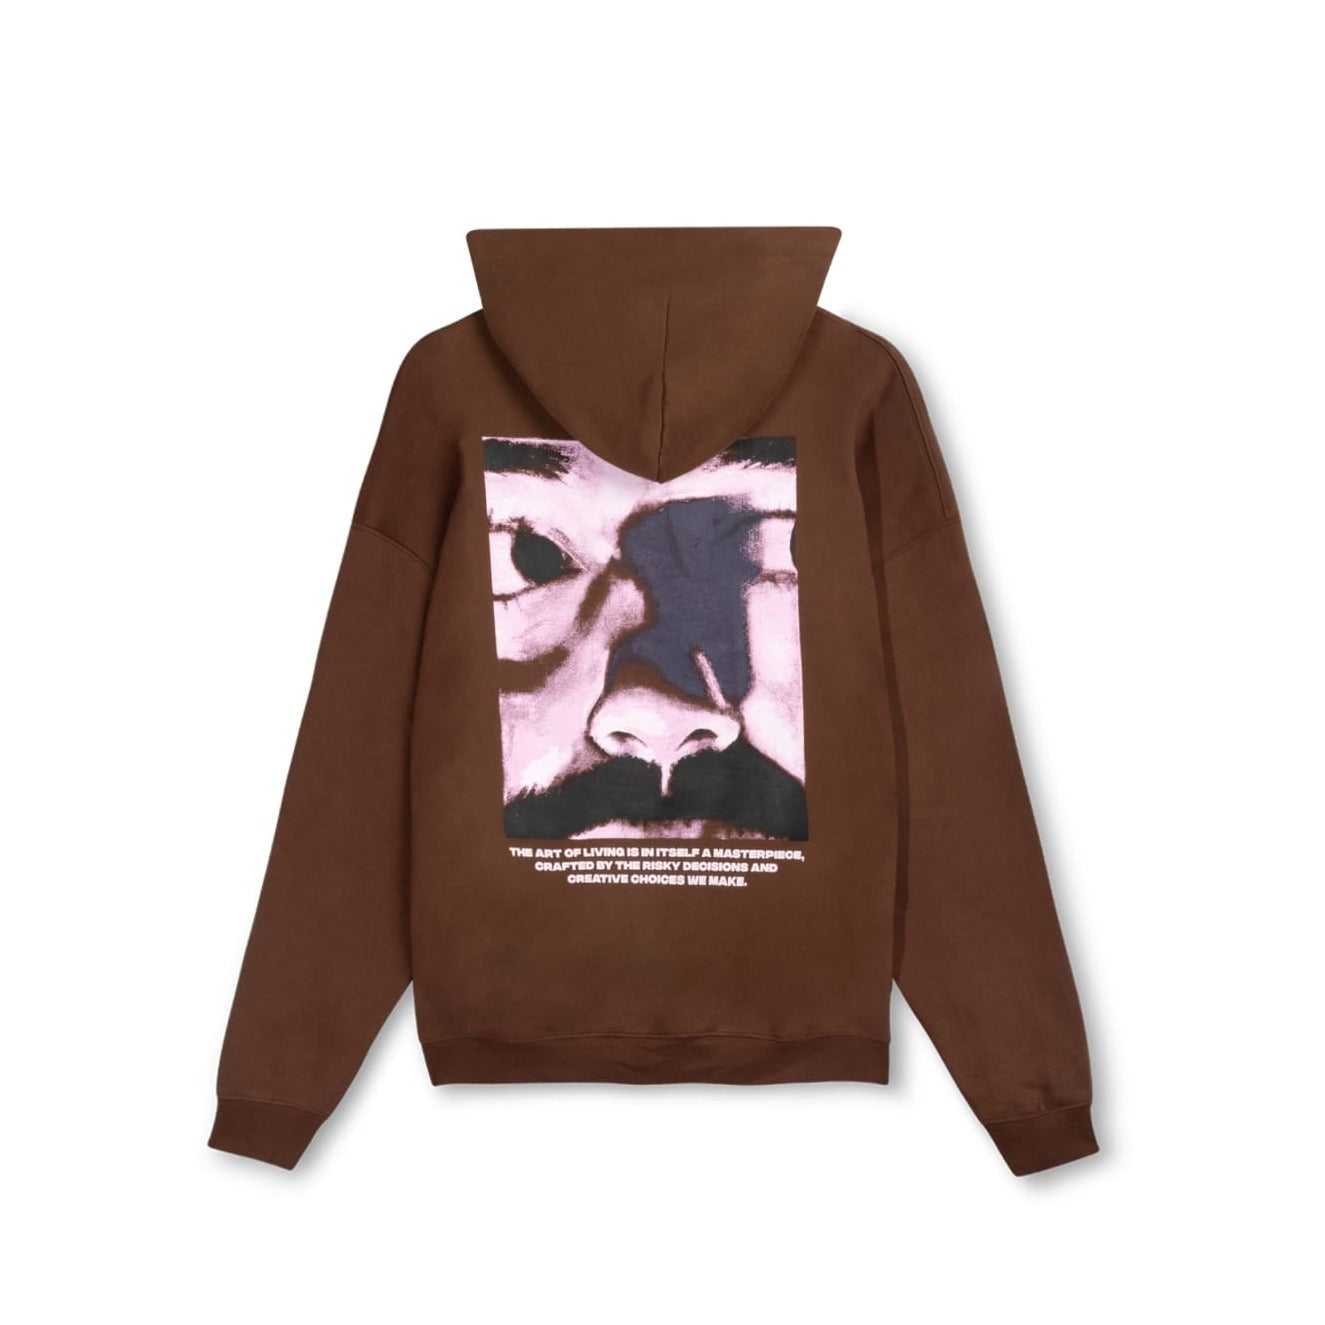 BY RISQUÉ x BO BOSK Collab Hoodie